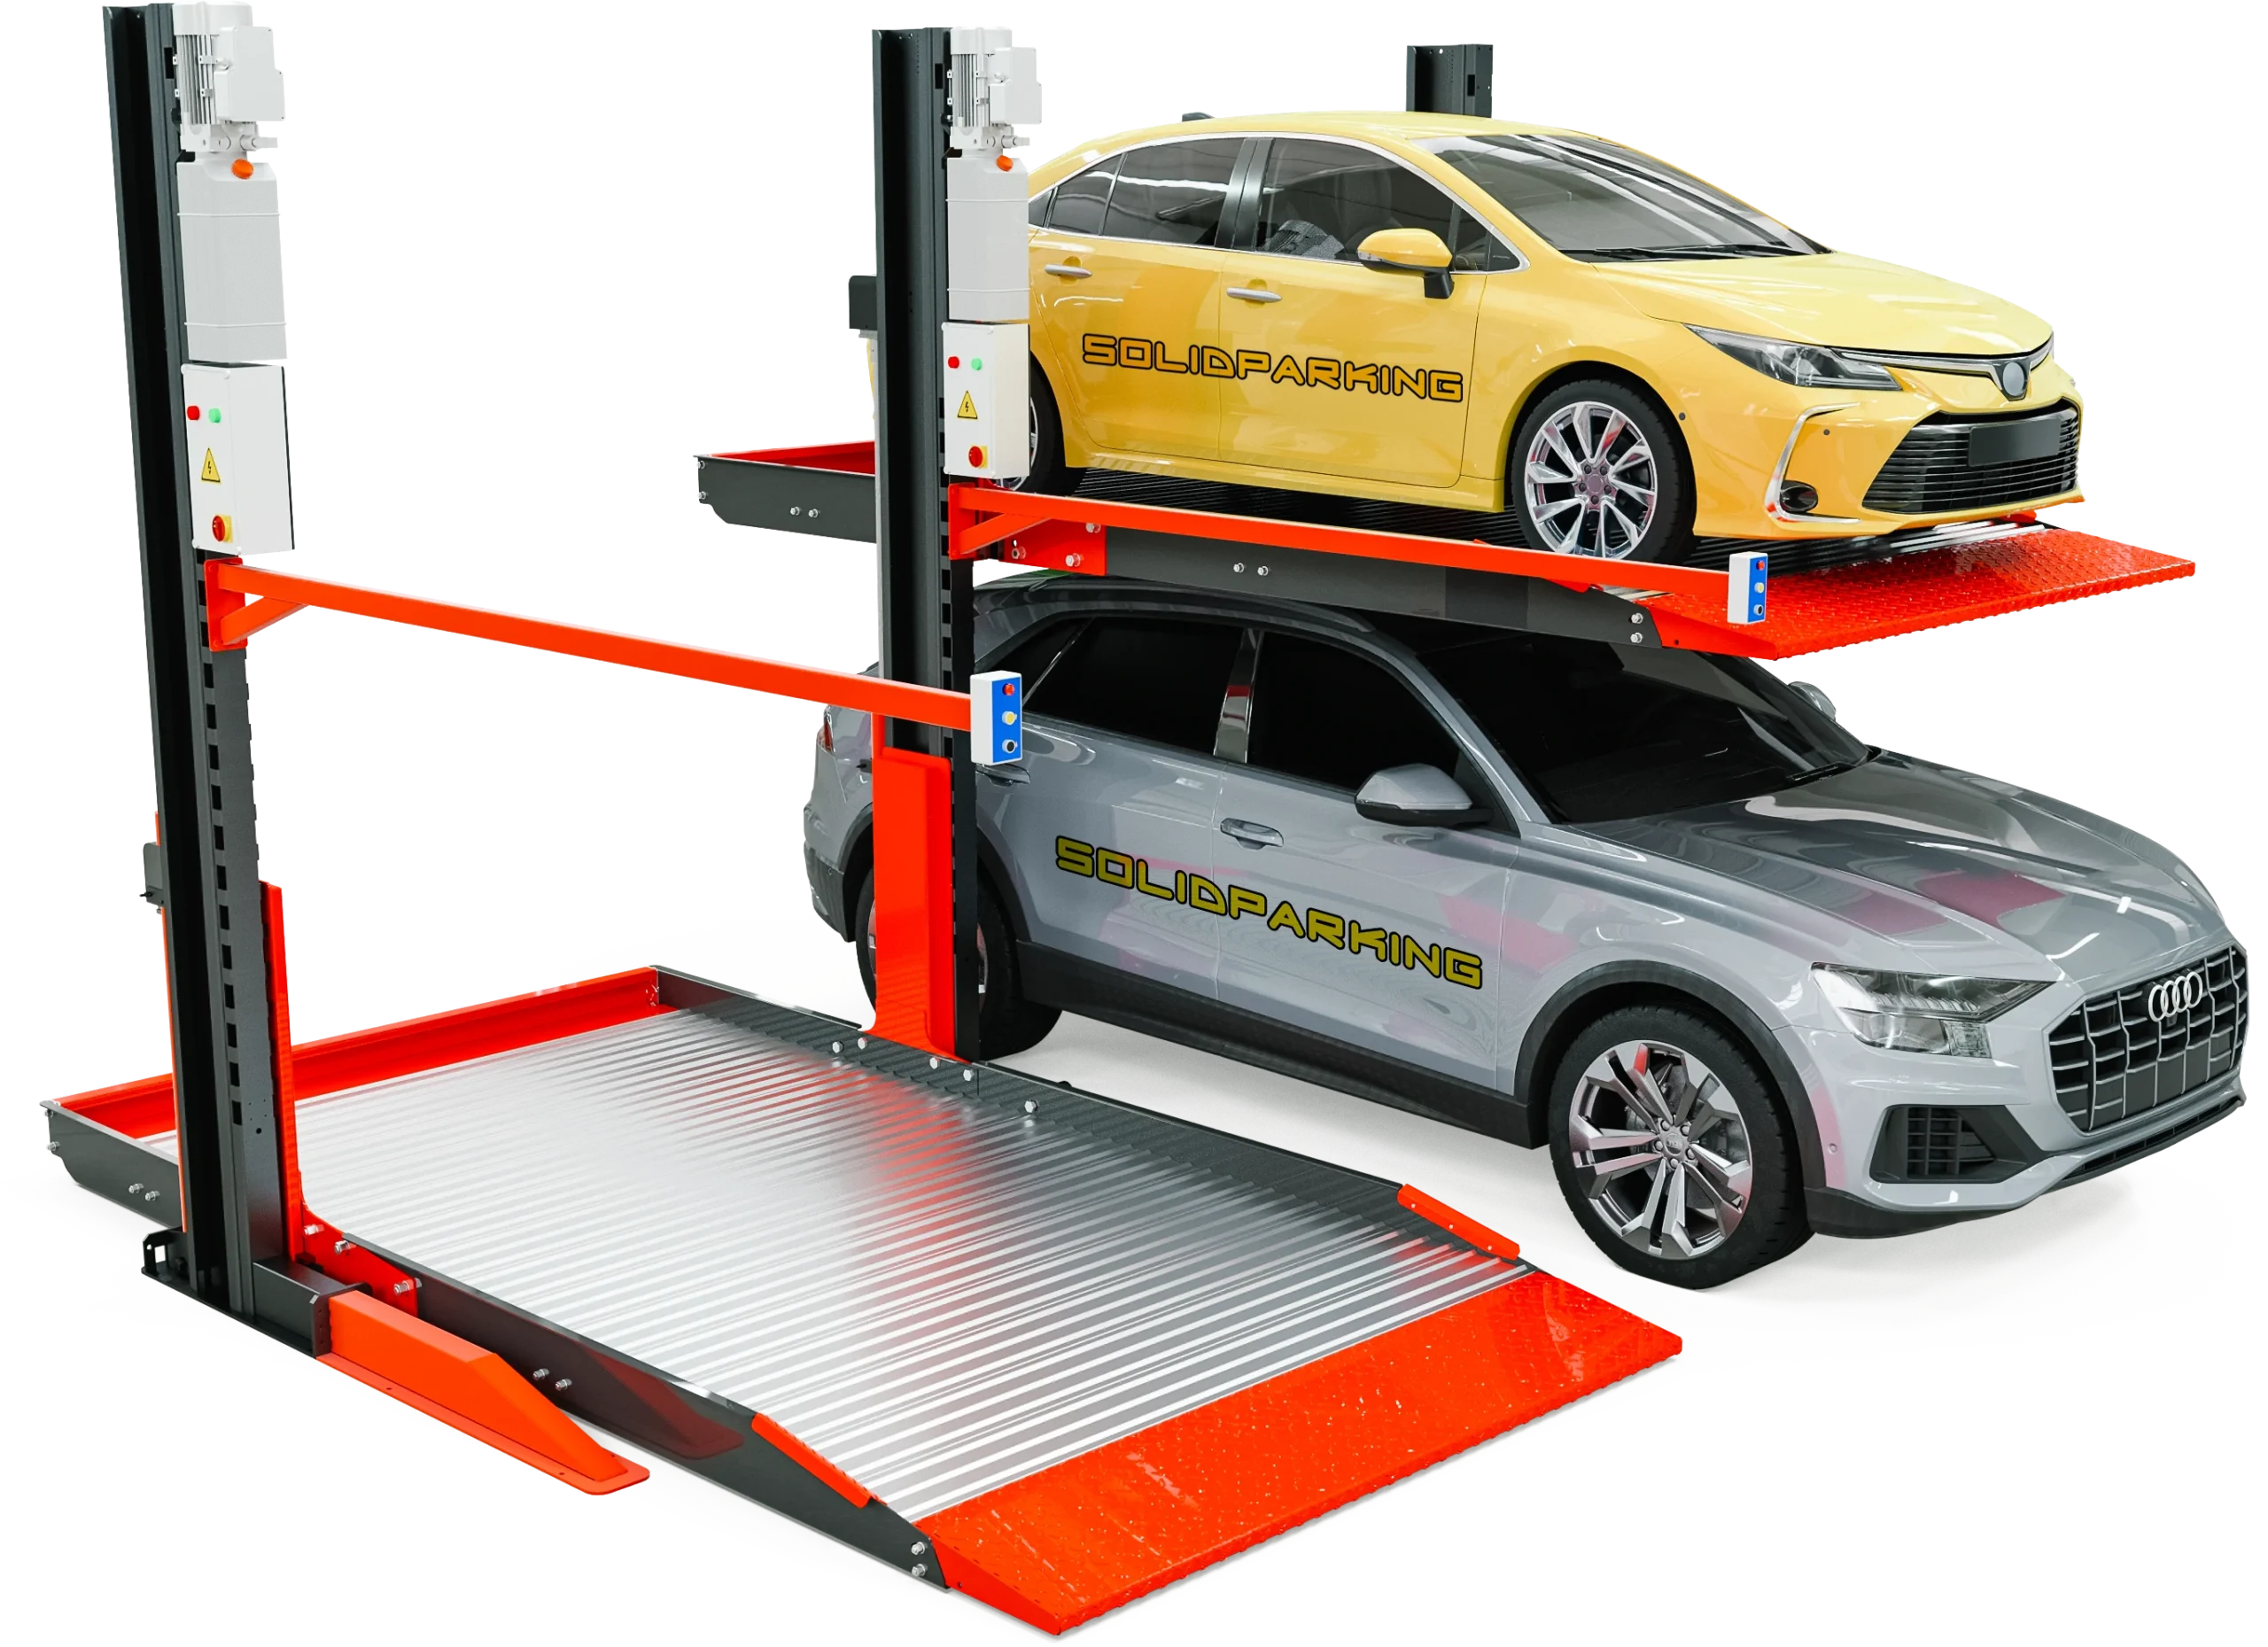 Two Post Parking Lift - Car Storage Lift, Automated Parking System & Car  Elevator - SolidParking